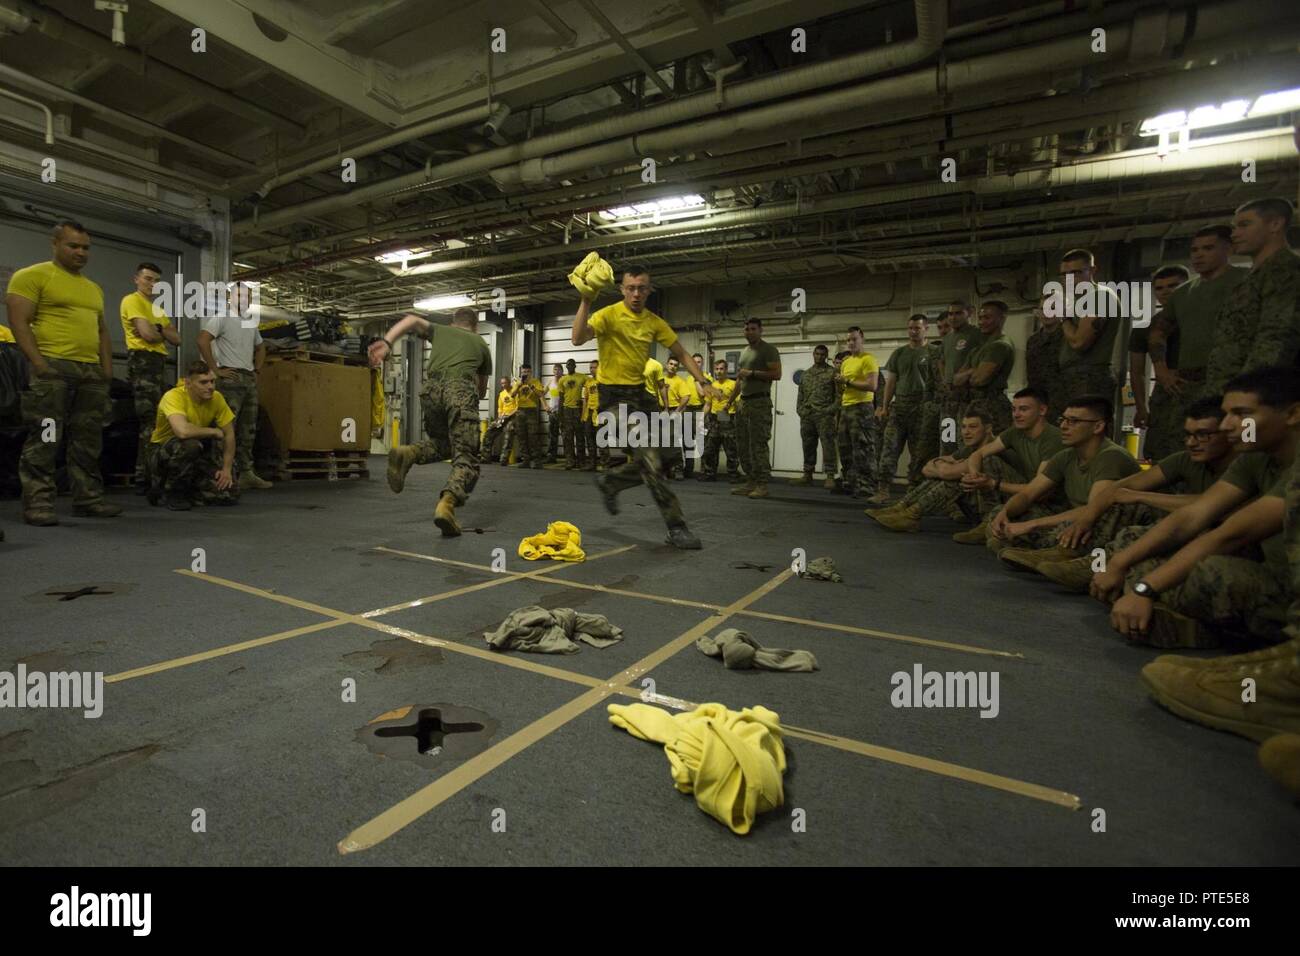 USNS SACAGAWEA— Marines and sailors with Task Force Koa Moana 17 compete in a game of relay tic-tac-toe against French soldiers in celebration of Bastille Day July 14 aboard the USNS SACAGAWEA. Bastille Day is recognized as the day the French gained their independence from King Louis XVI by liberating prisoners from the Bastille Prison in 1789 and are now celebrating their 228th year as a free nation. Stock Photo